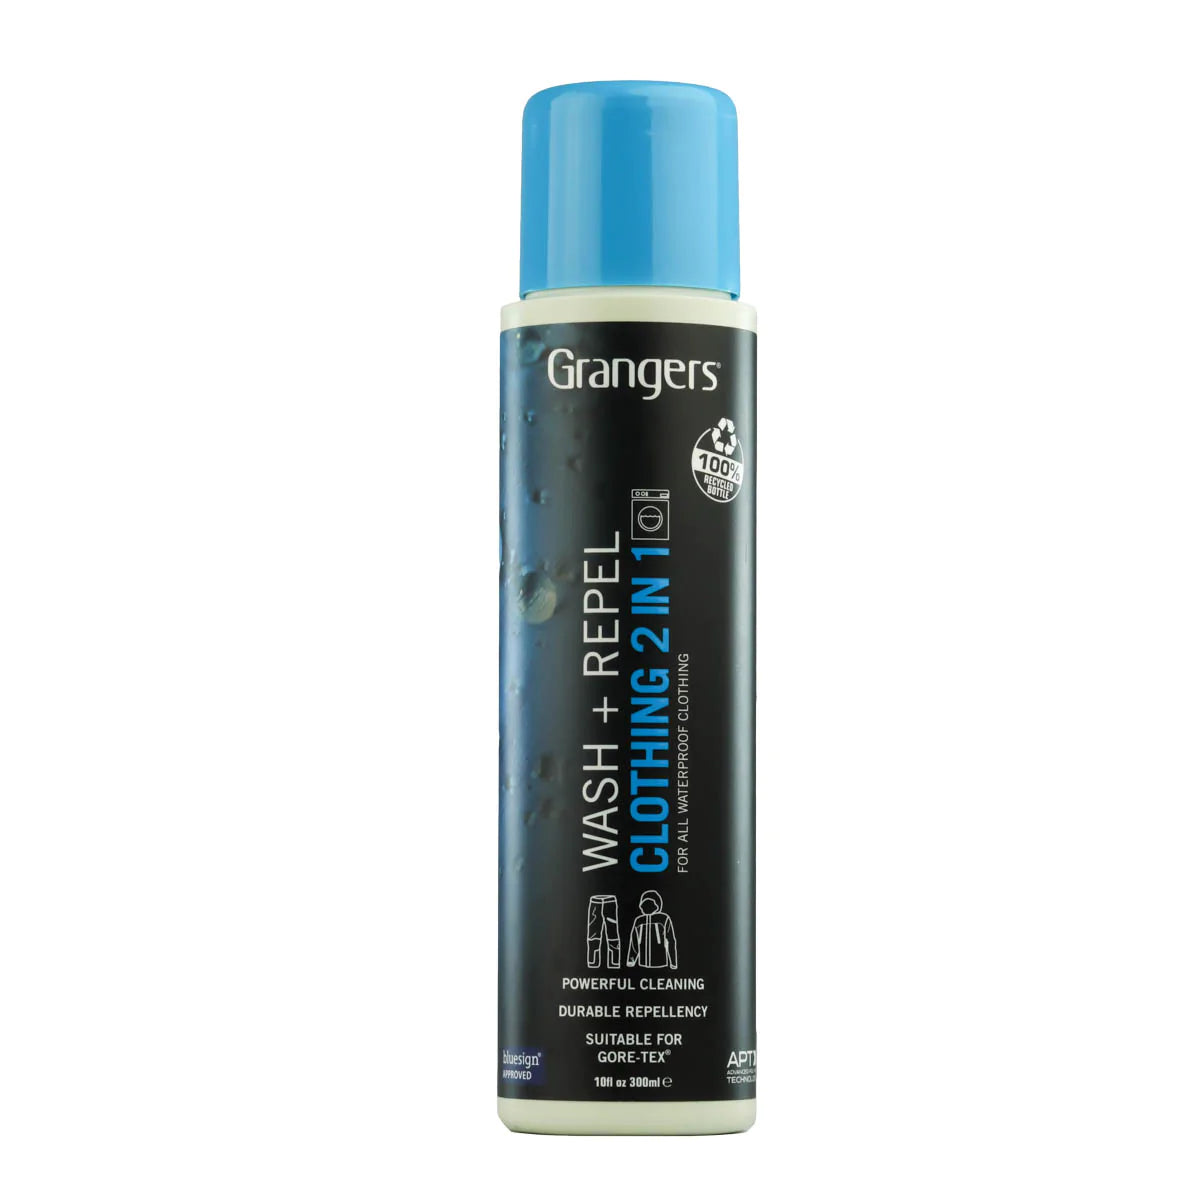 Grangers Wash + Repel Clothing 2 in 1 Wash - 300mls